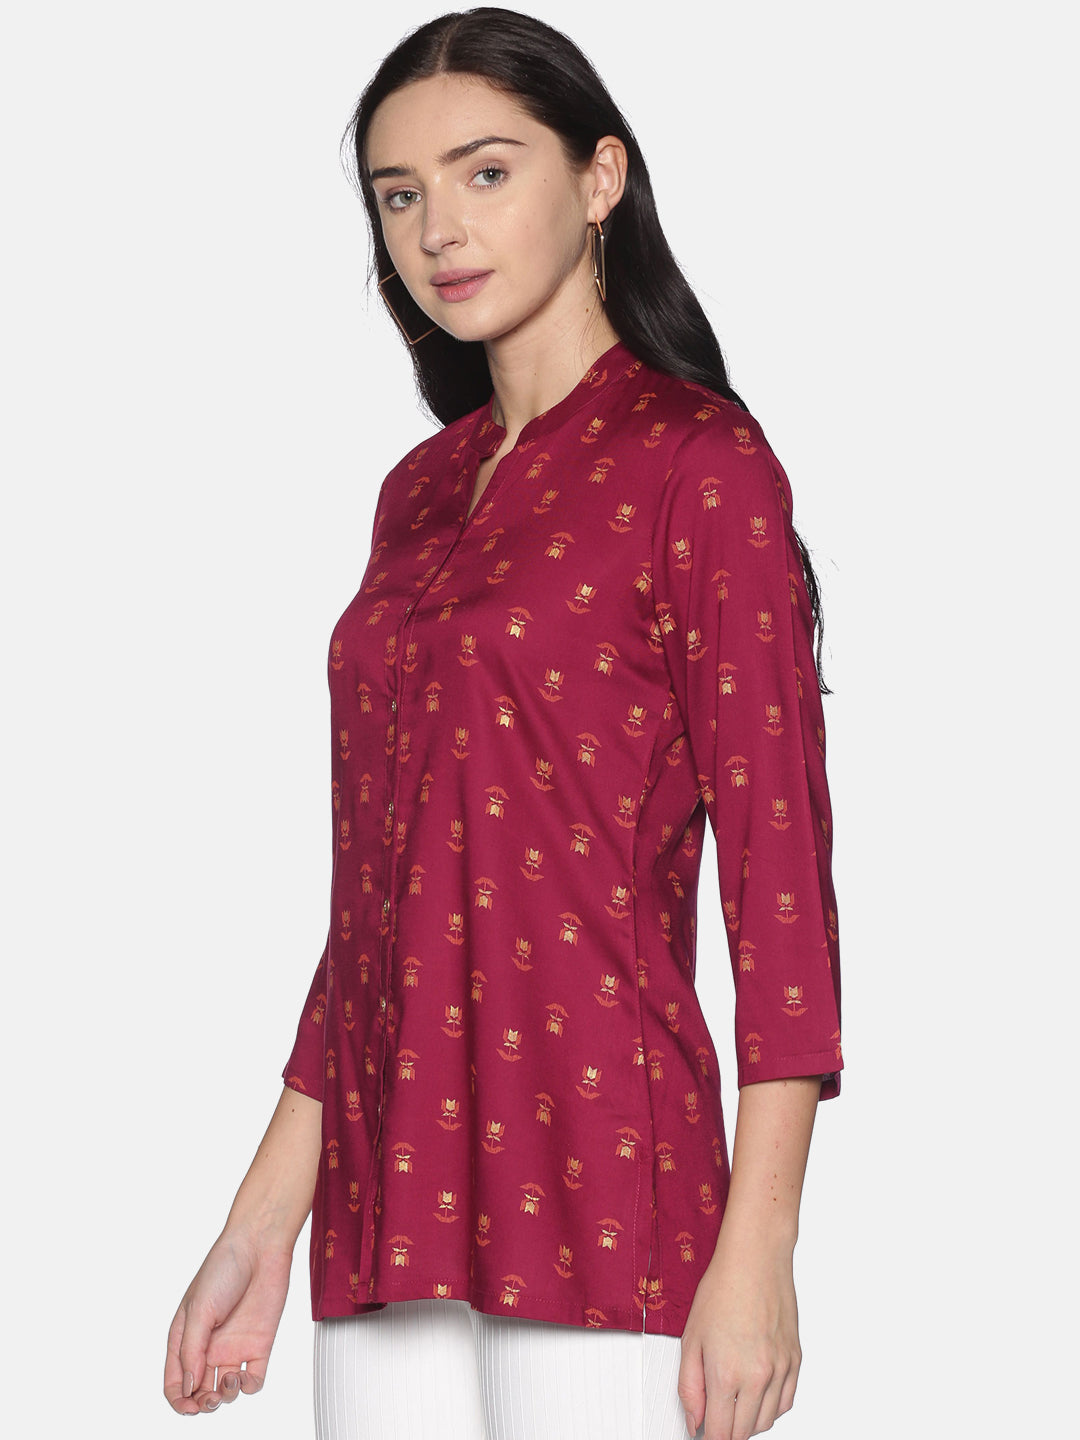 Burgundy Gold Printed Tunic With Mandarin Collar And Gold Metal Buttons